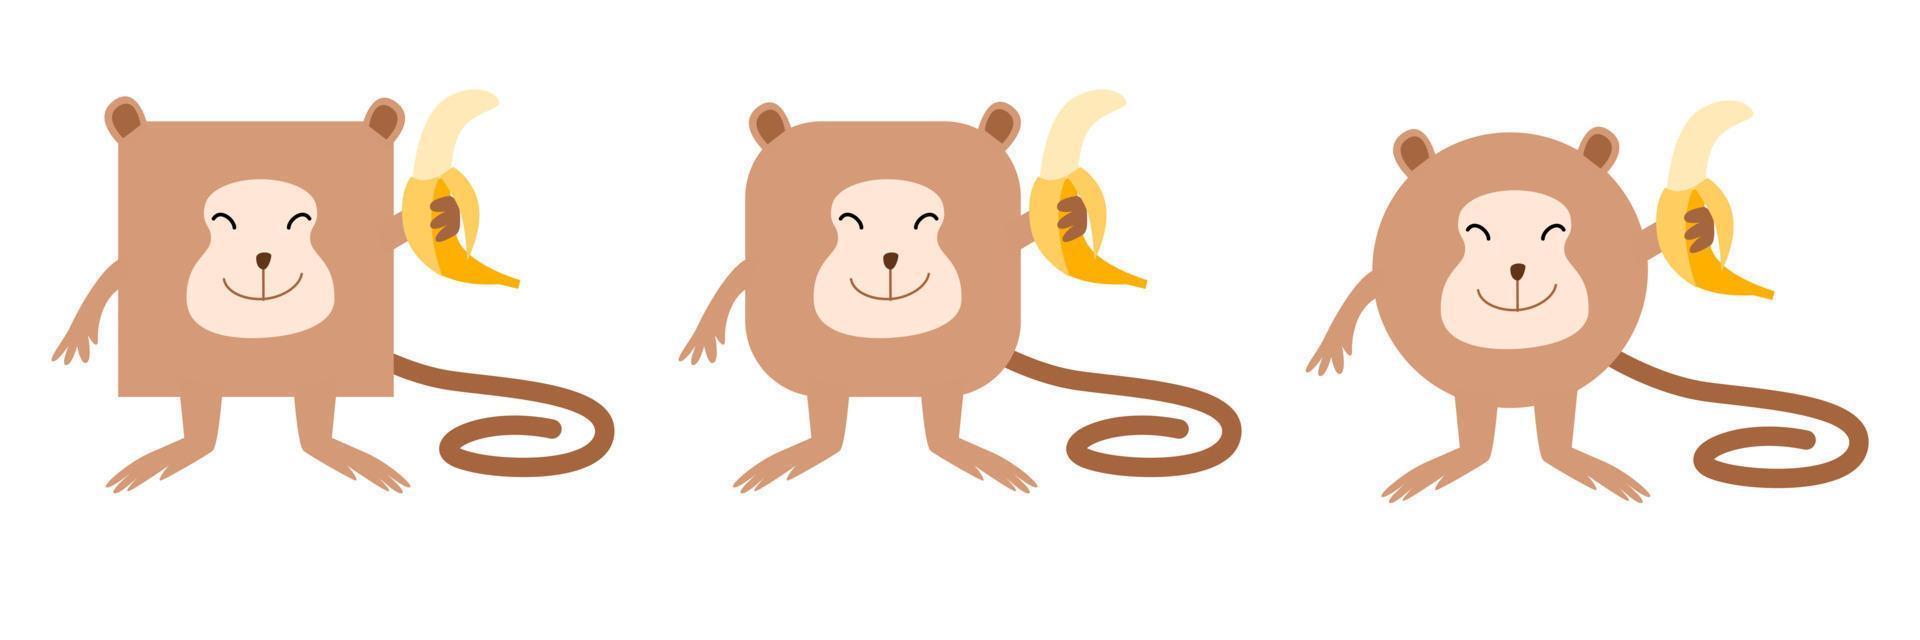 A set of animals of square and round shape. Vector illustration of a monkey with a banana